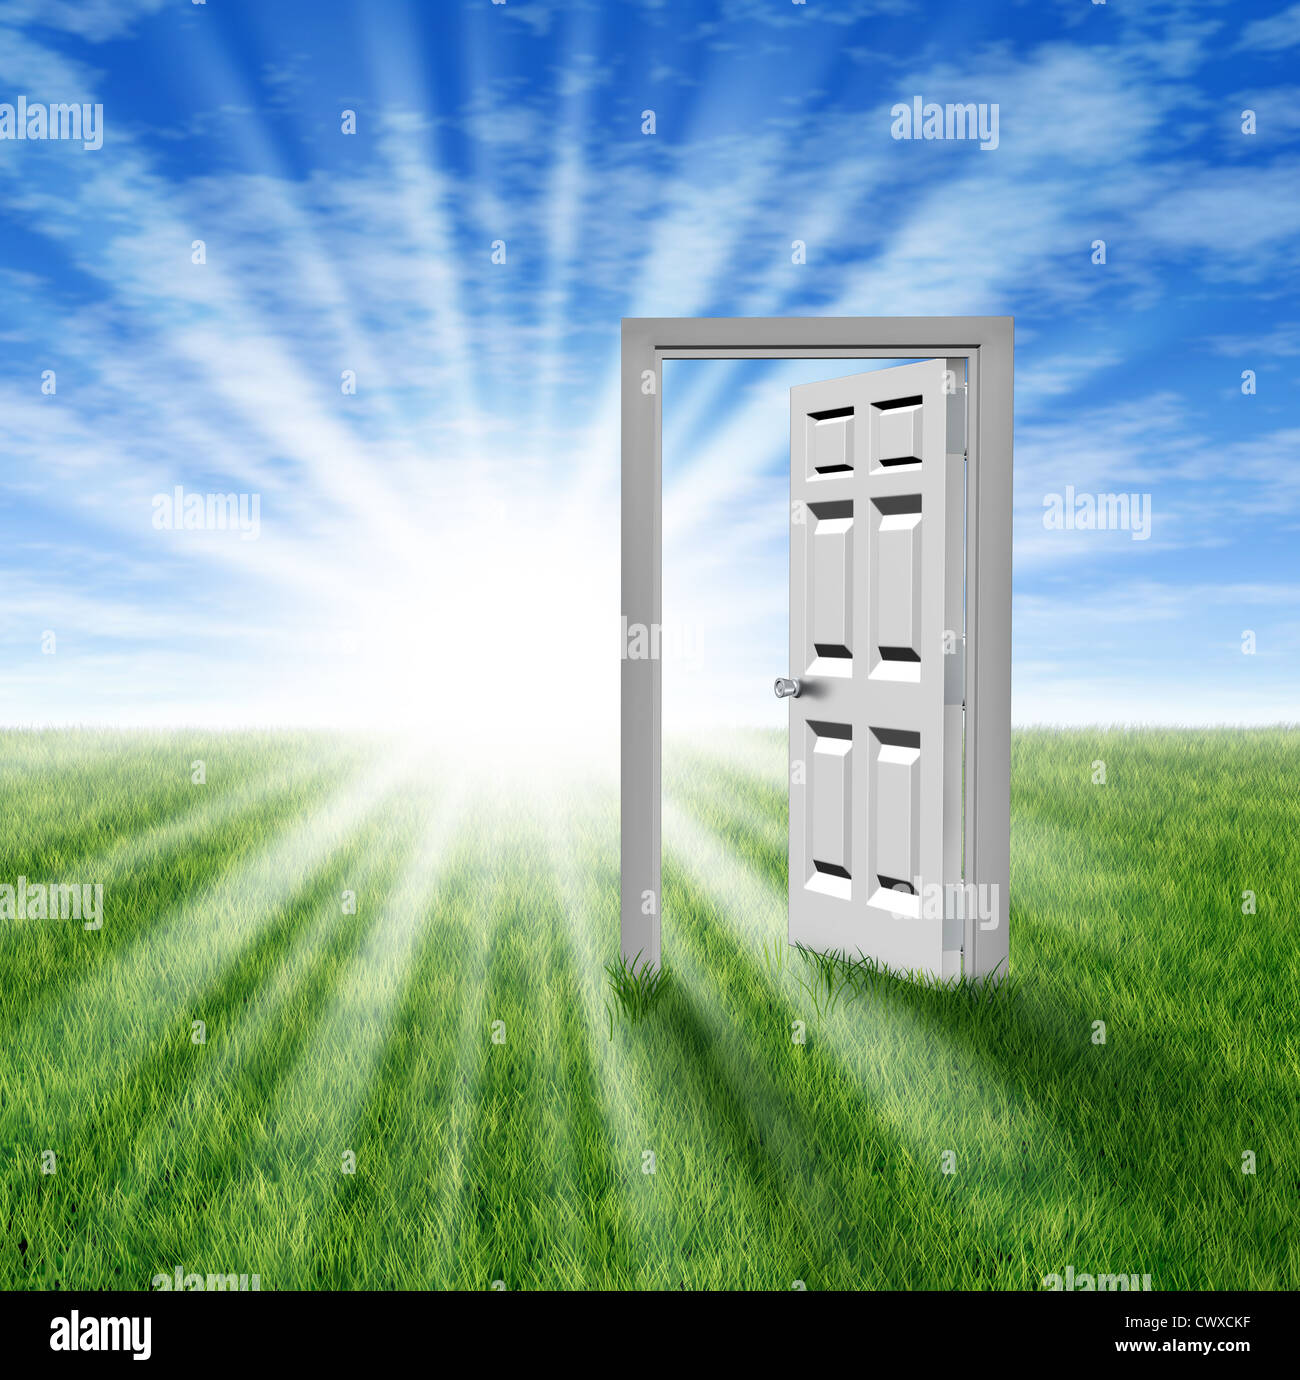 Goals and aspirations as a door to opportunity with a grass field and an open doorway entrance to success and freedom showing a Stock Photo